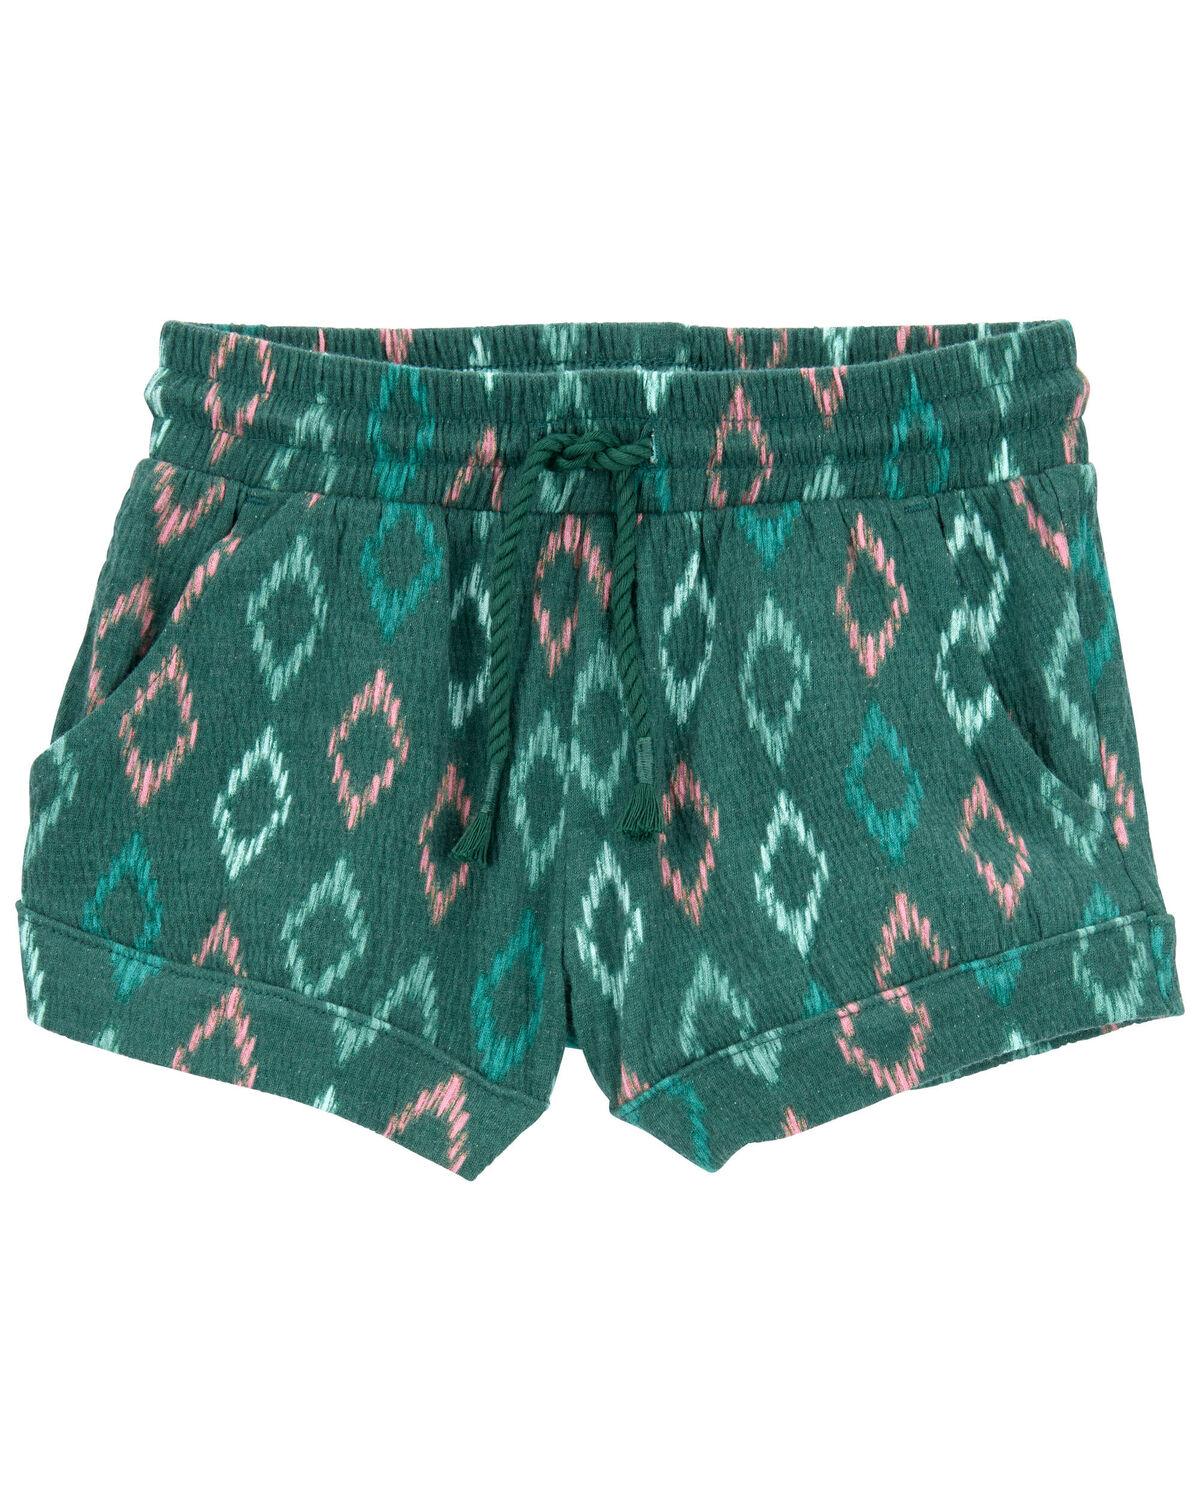 Multi Baby Pull-On Knit Gauze Shorts | carters.com